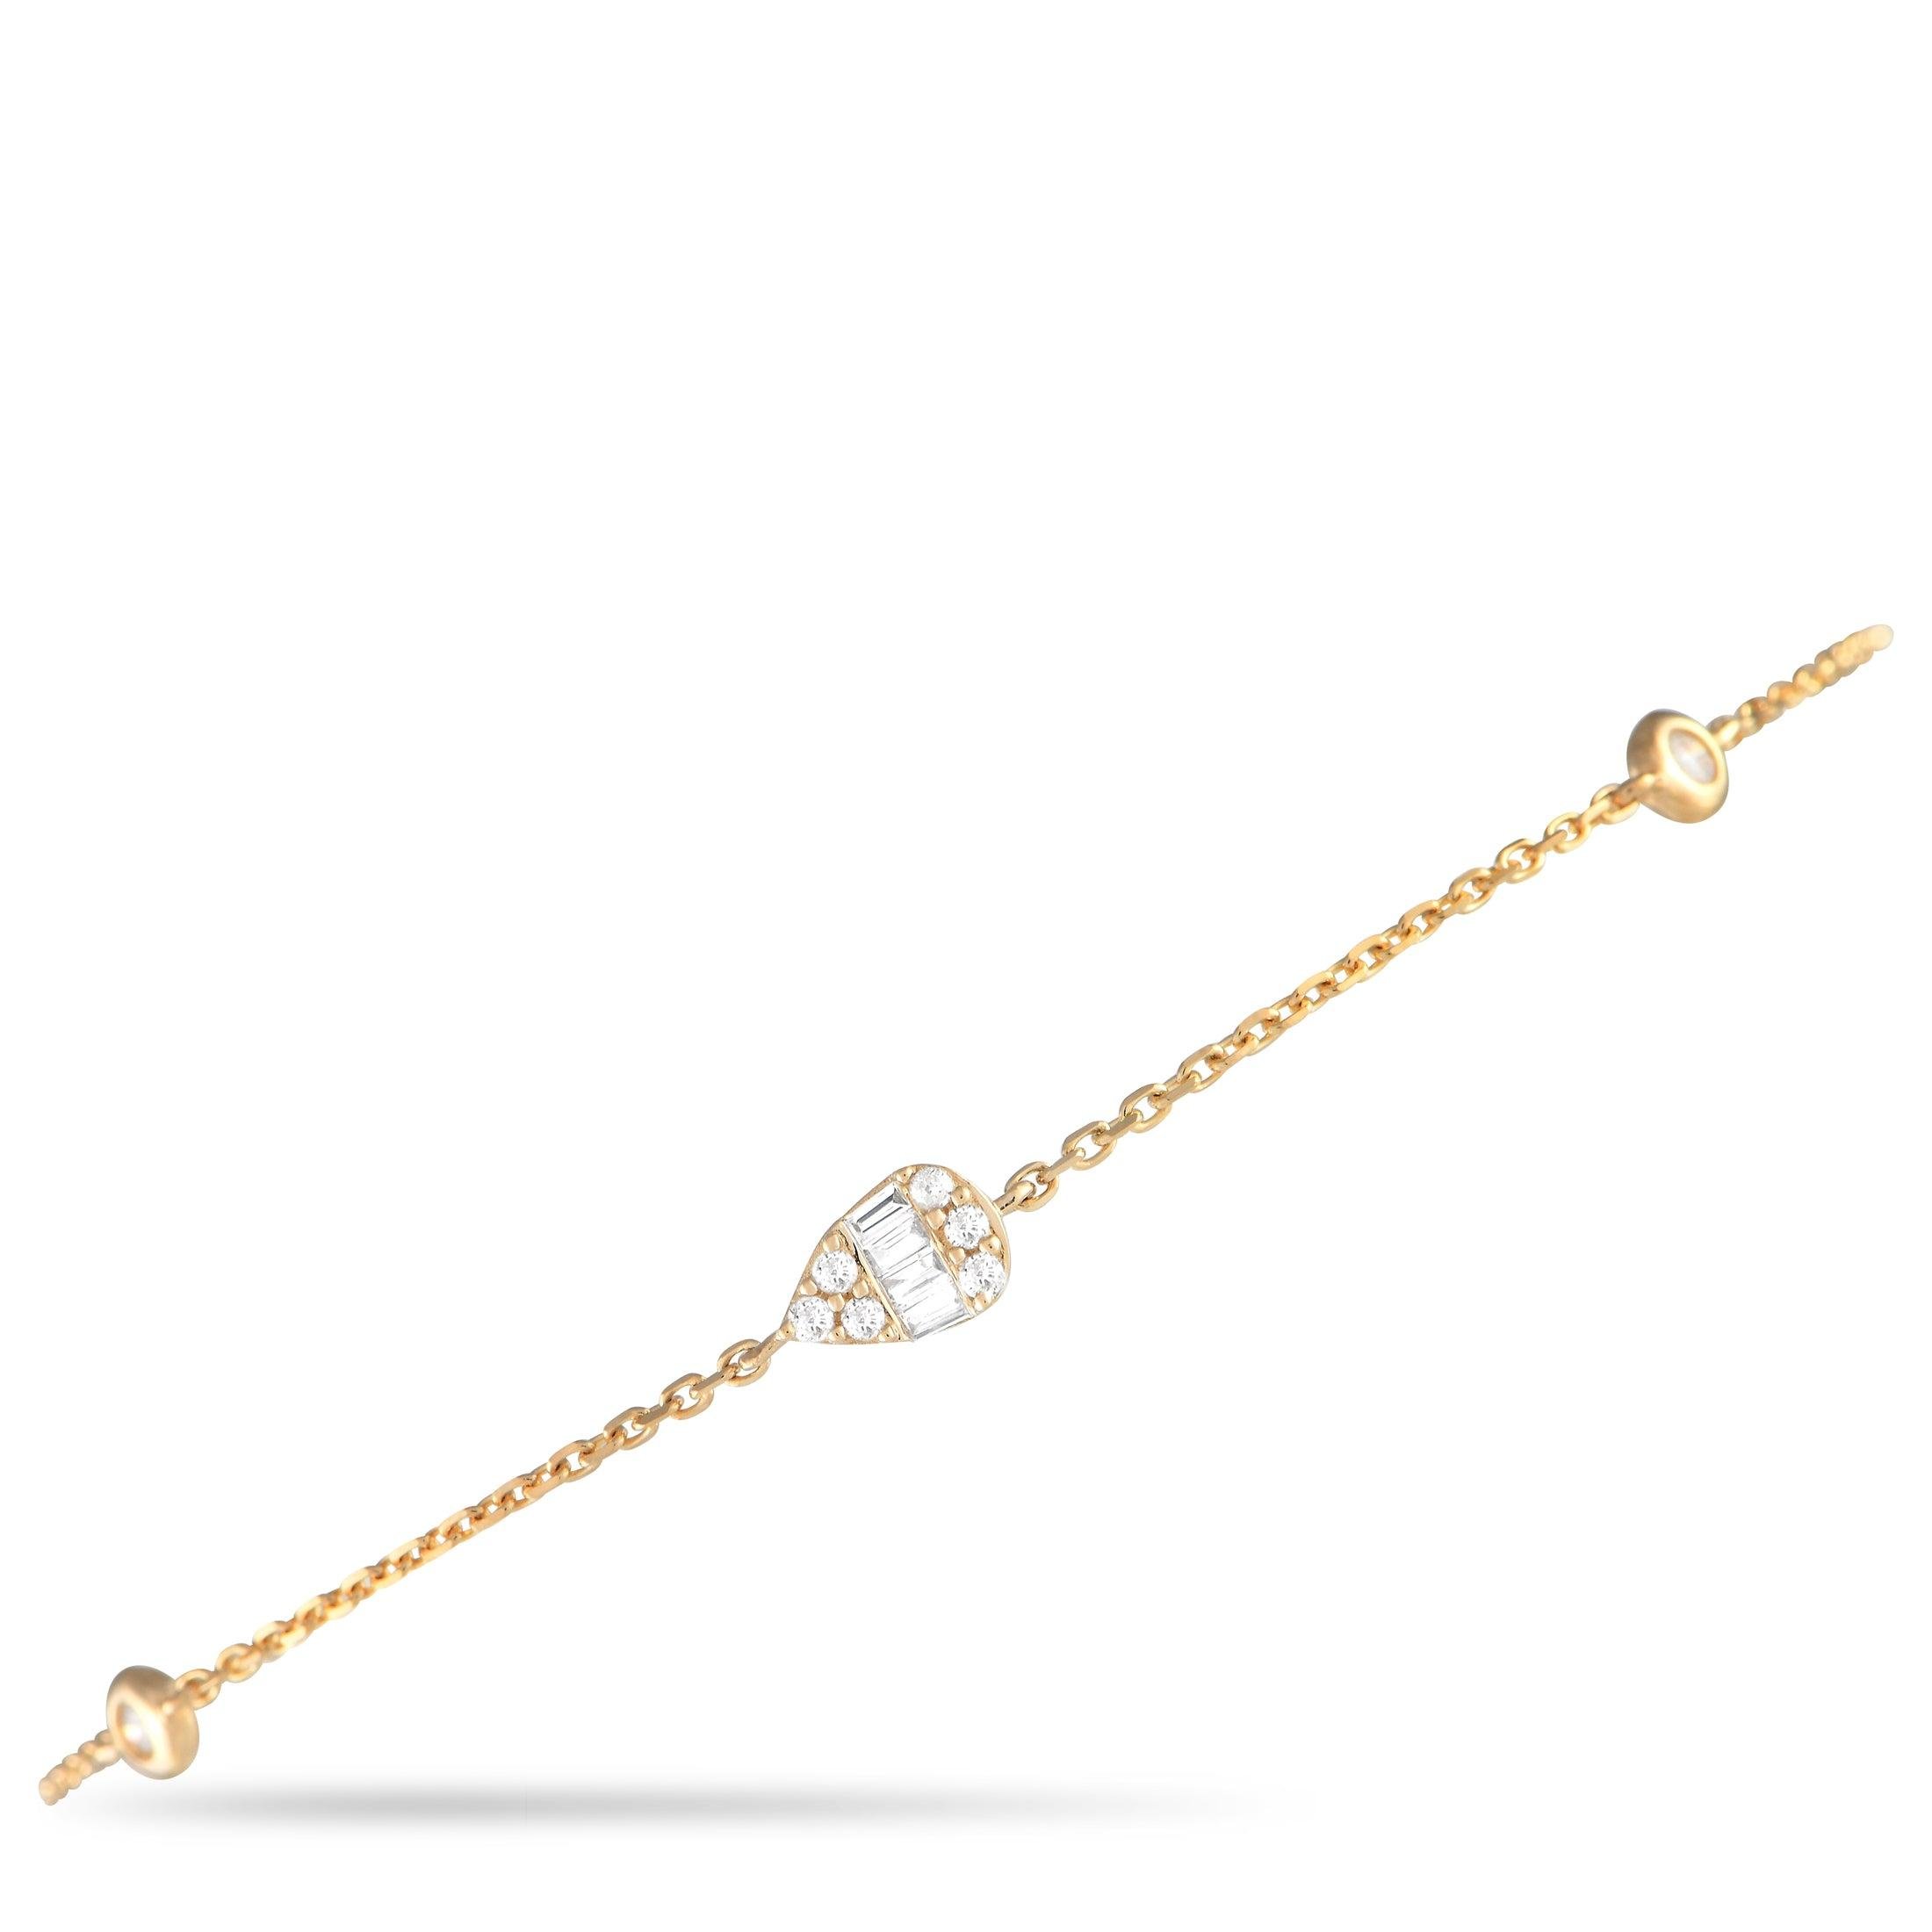 LB Exclusive 14K Yellow Gold 0.15ct Diamond Bracelet BR09820-Y by NON BRANDED